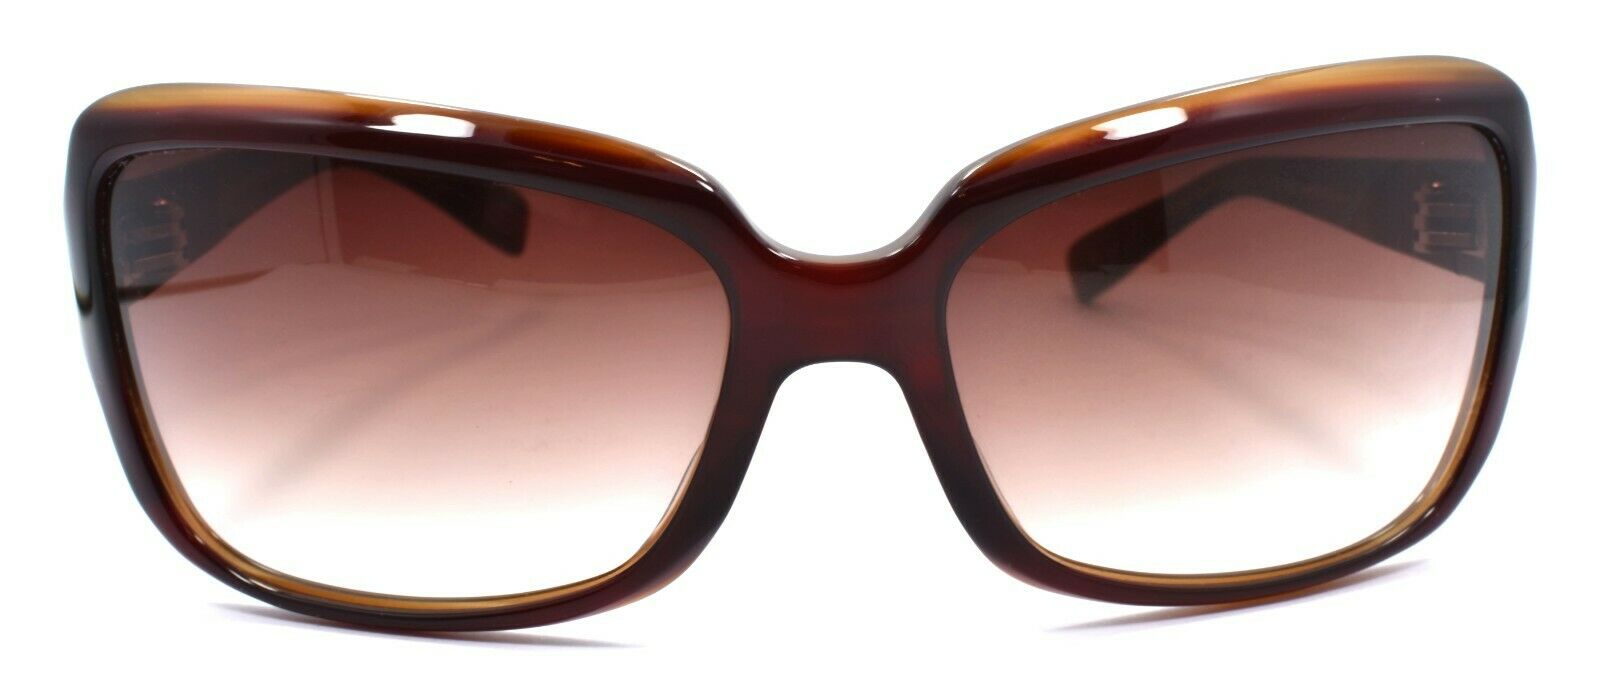 2-Oliver Peoples Dunaway SISYC Women's Sunglasses Sienna Sycamore / Brown Gradient-Does not apply-IKSpecs